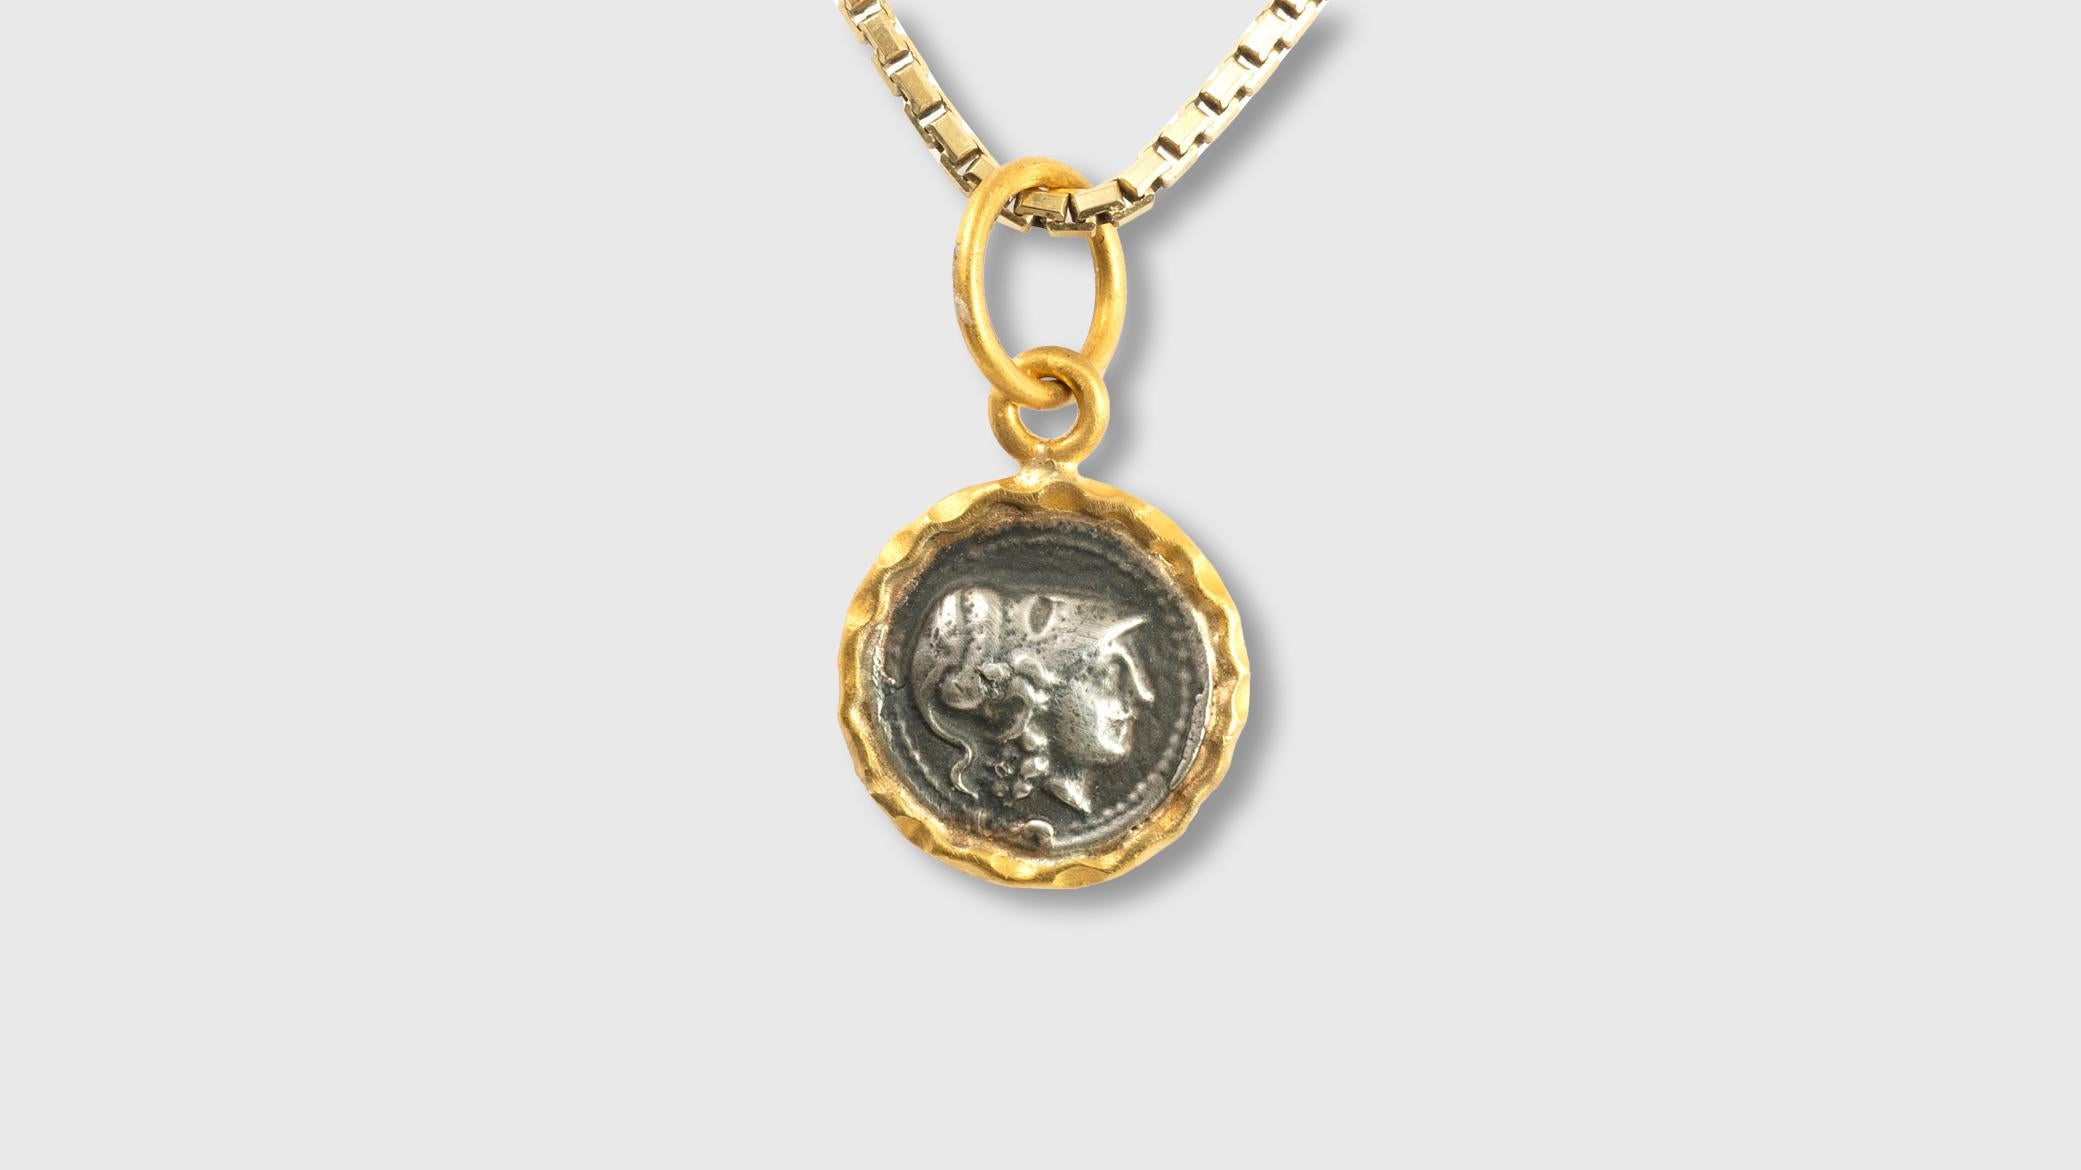 Ancient Athena, Wisdom Goddess, Coin (Replica) Charm Pendant, 24kt Gold & Silver In New Condition For Sale In Bozeman, MT